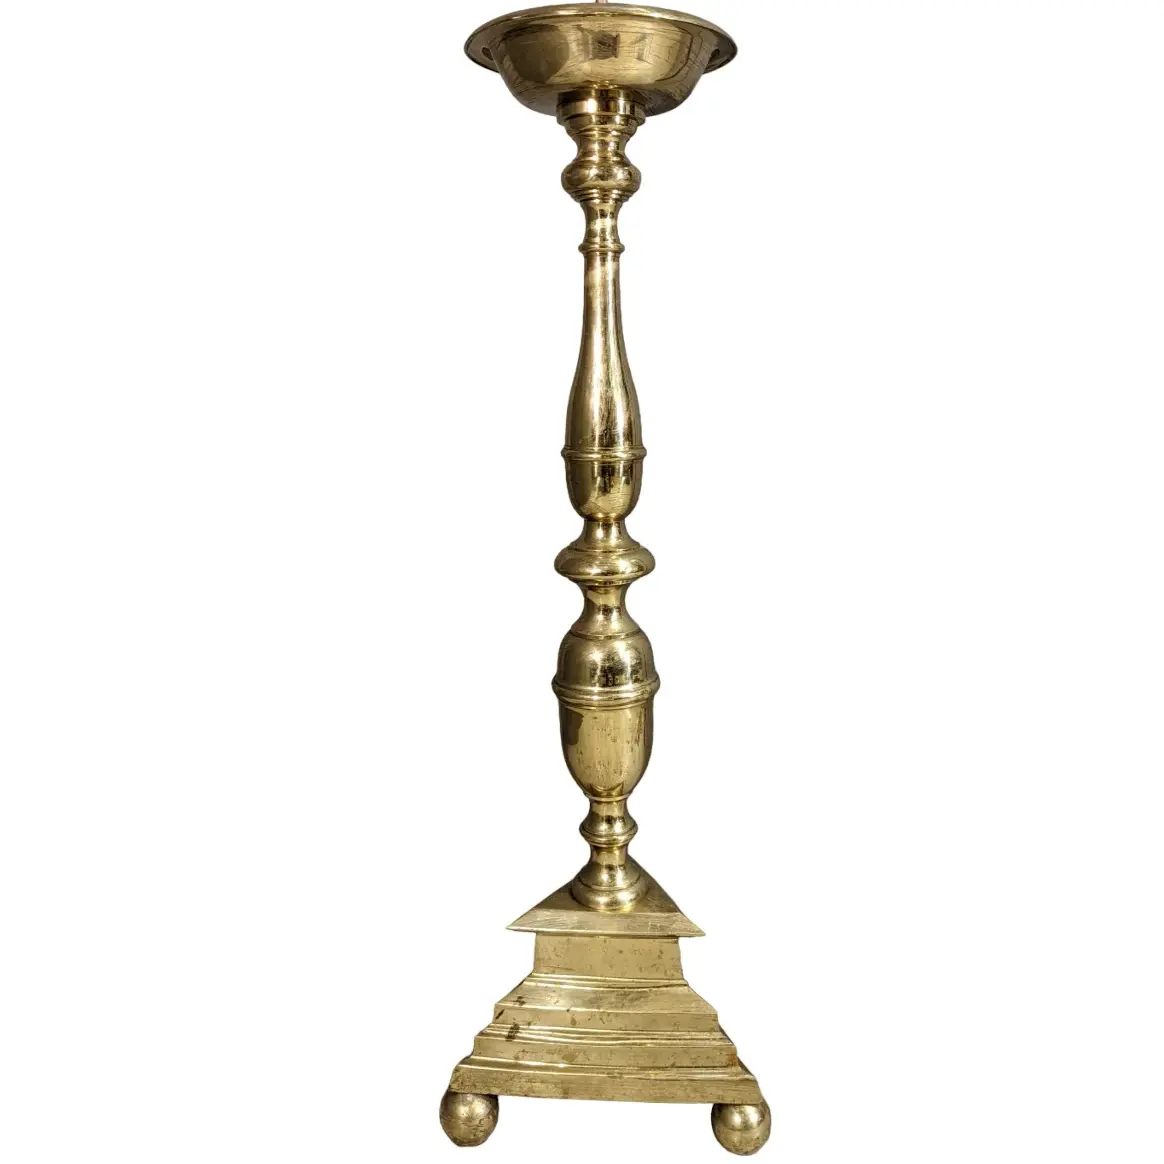 Standard Golden Hot Selling Candelabra For Church In Export Quality With Durable Material In Affordable Prices